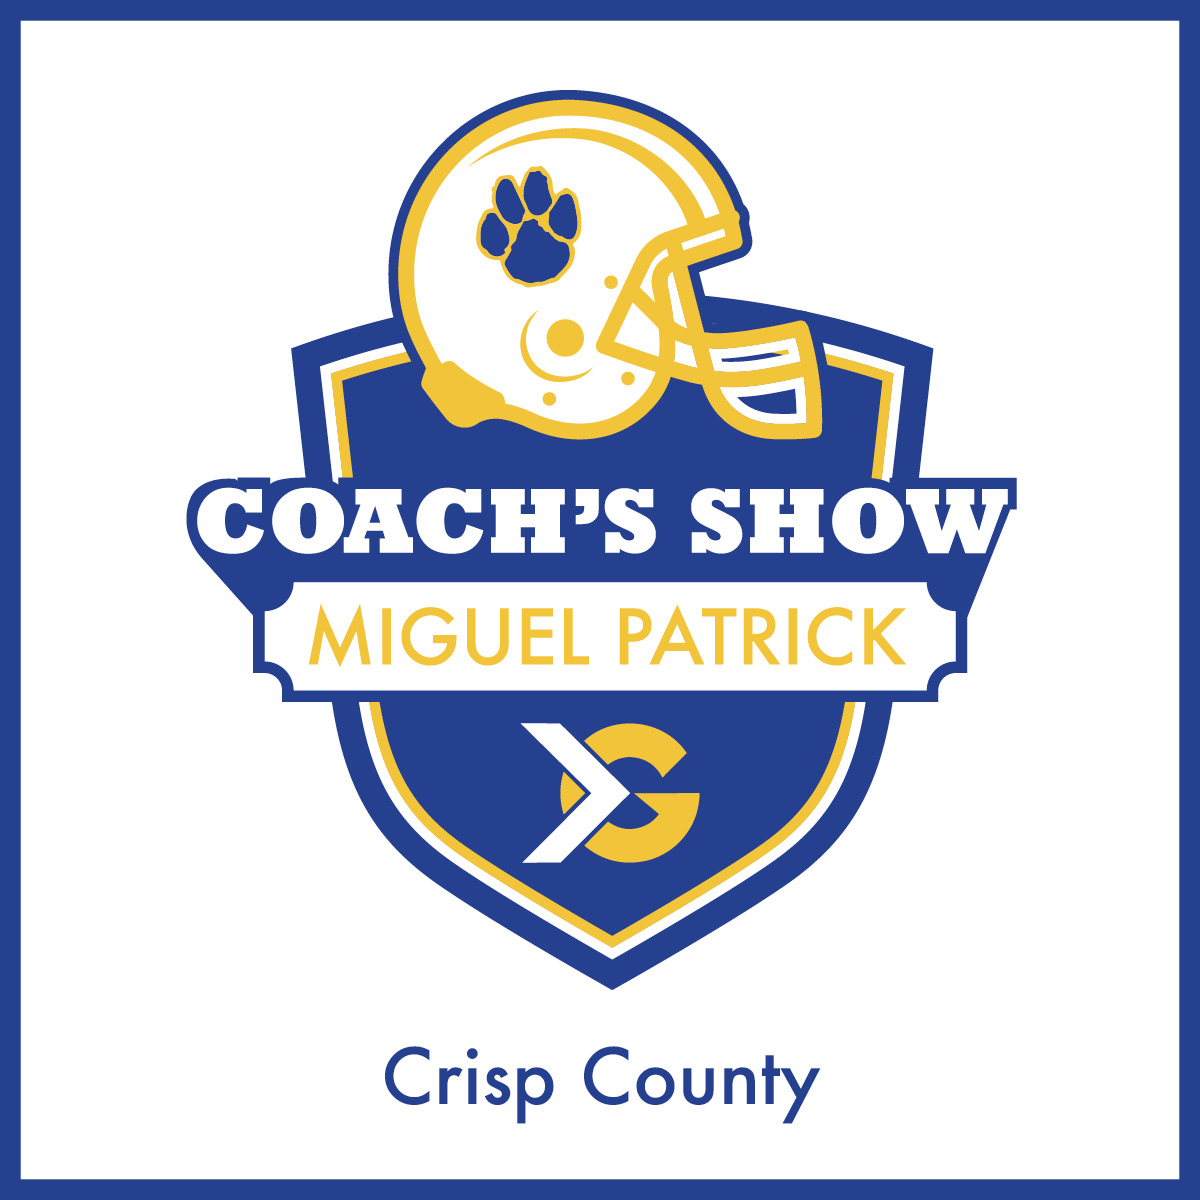 Crisp County Football Coach's Show With Miguel Patrick - ITG Next